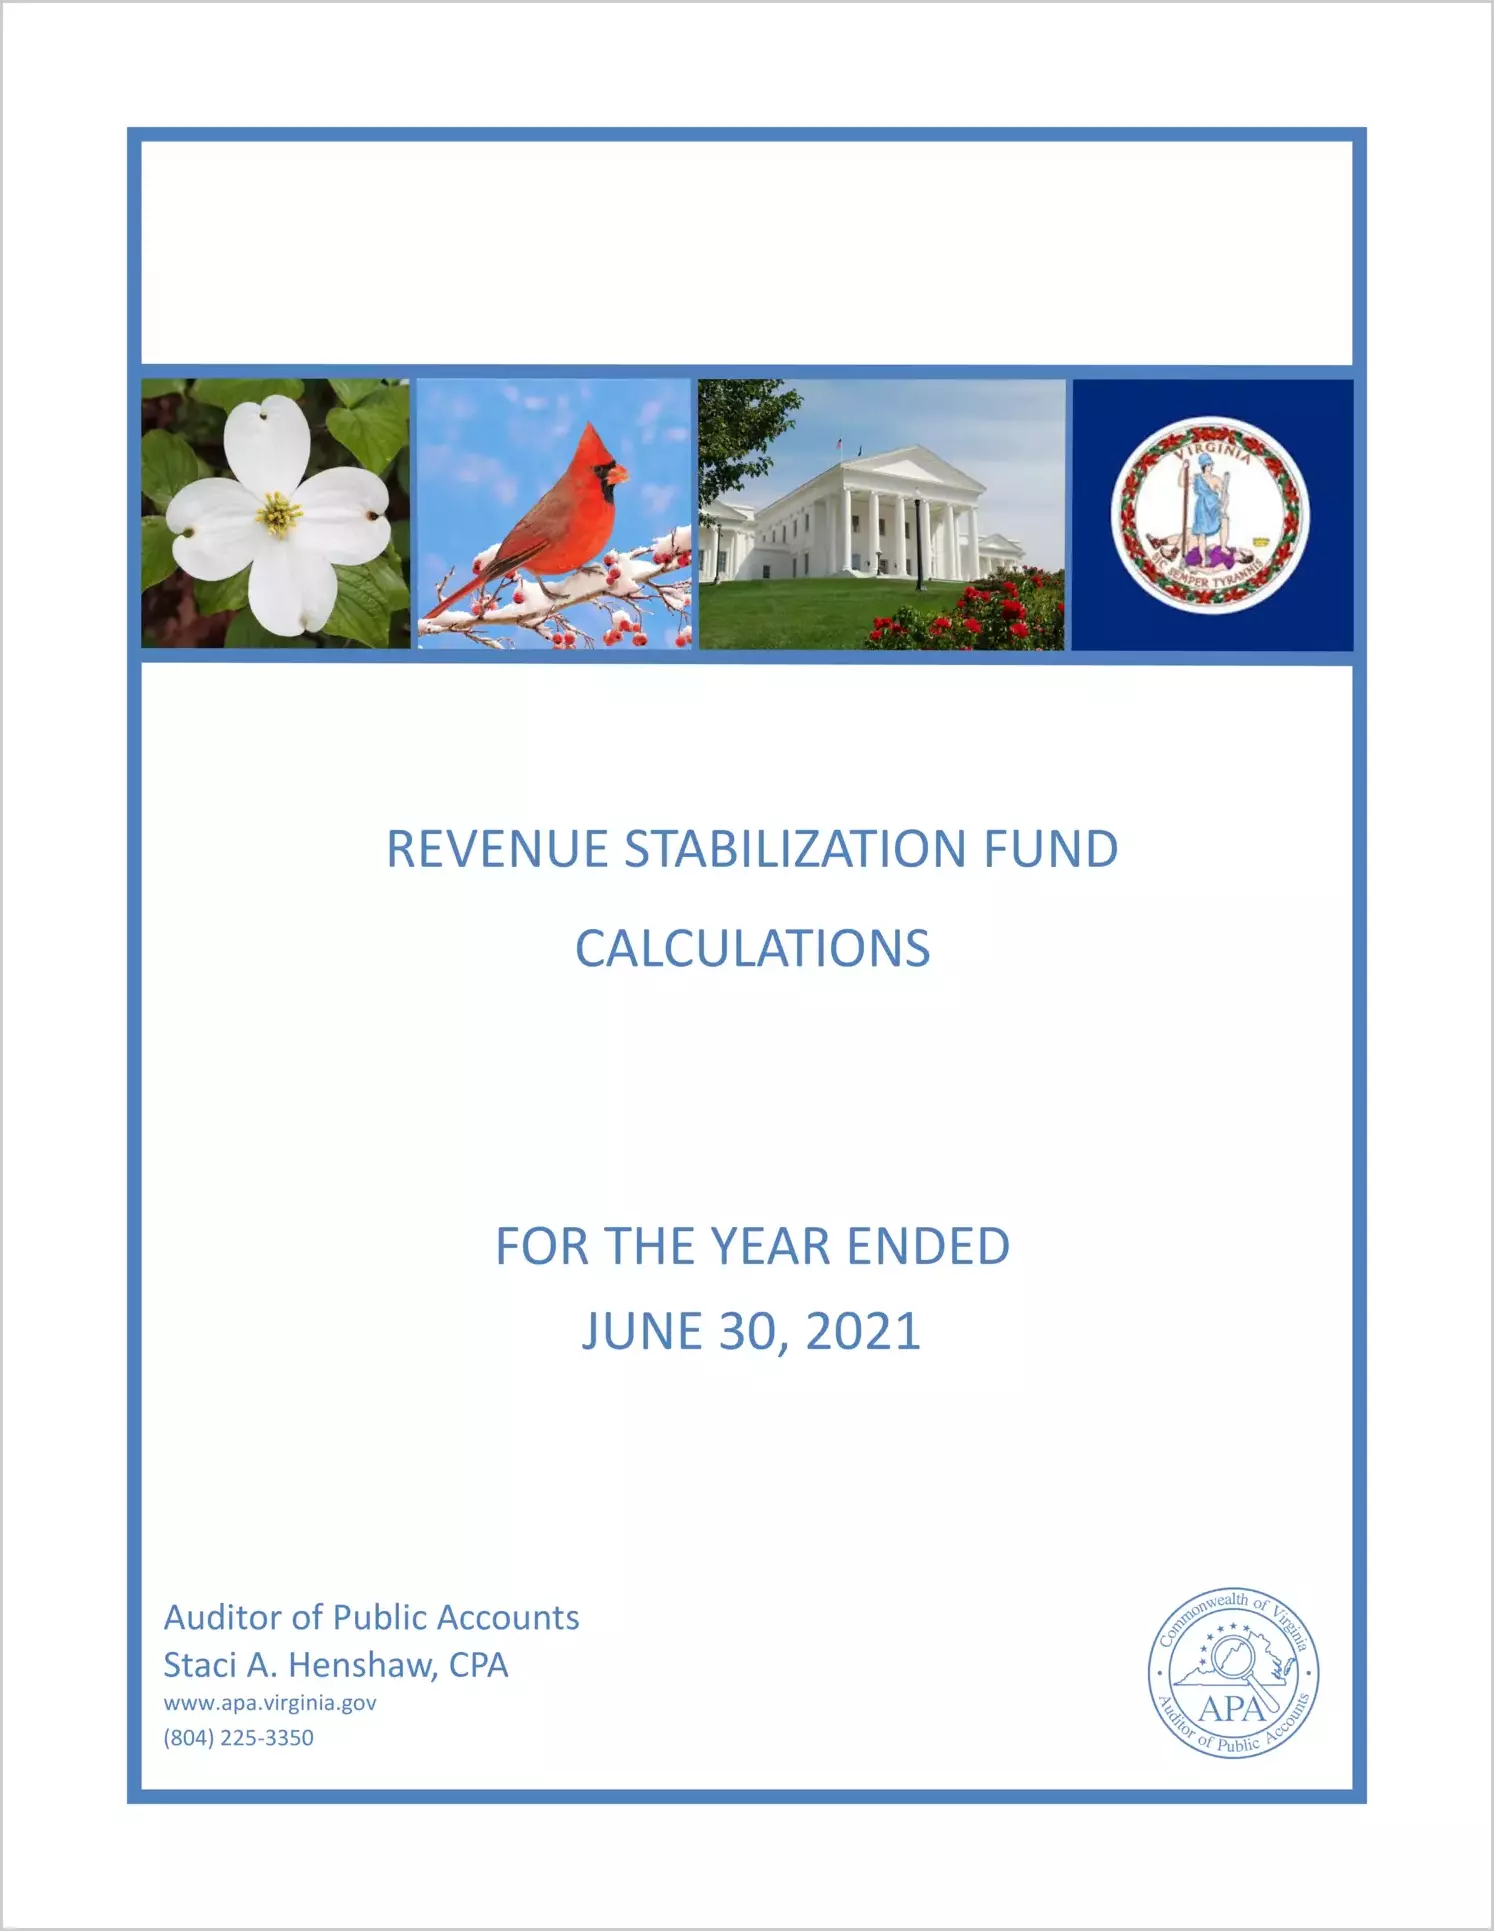 Revenue Stabilization Fund Calculations for the year ended June 30, 2021